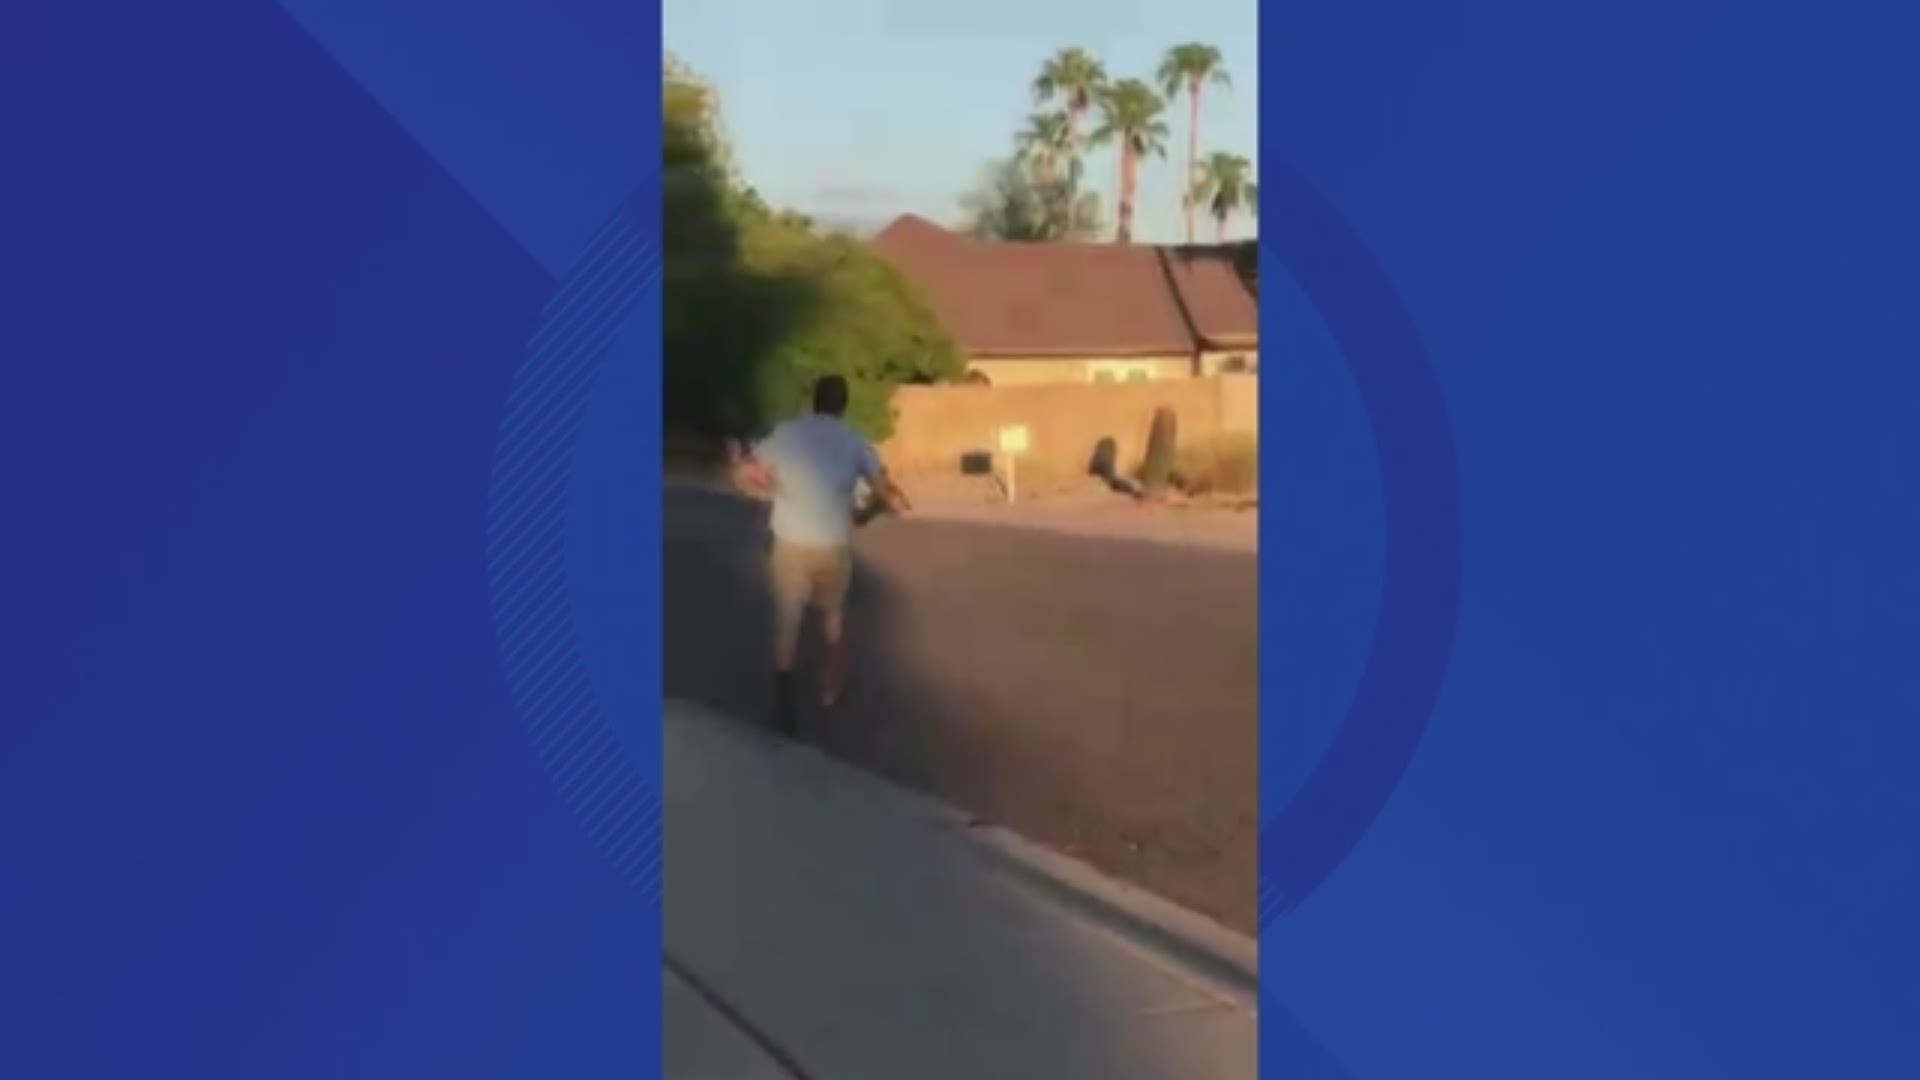 Video from one of the neighbors shows the coyote running down the street with the dog in its mouth as a neighbor sprints after it. The dog is OK.